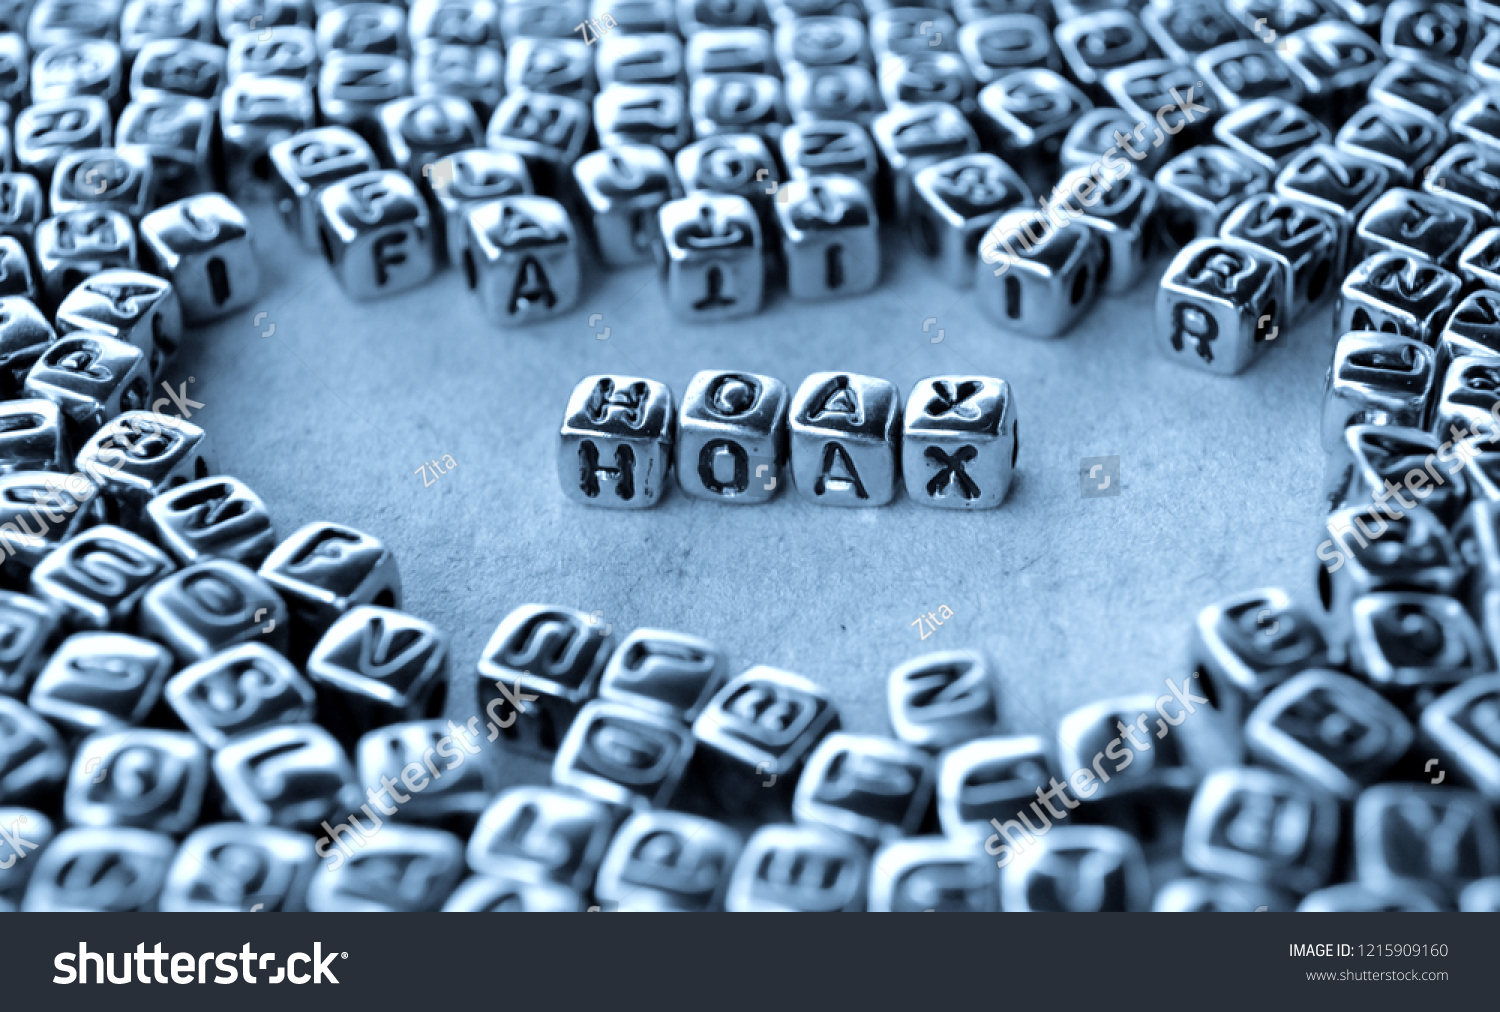 Hoax - Word from Metal Blocks on Paper - Concept Photo on Table
 #1215909160